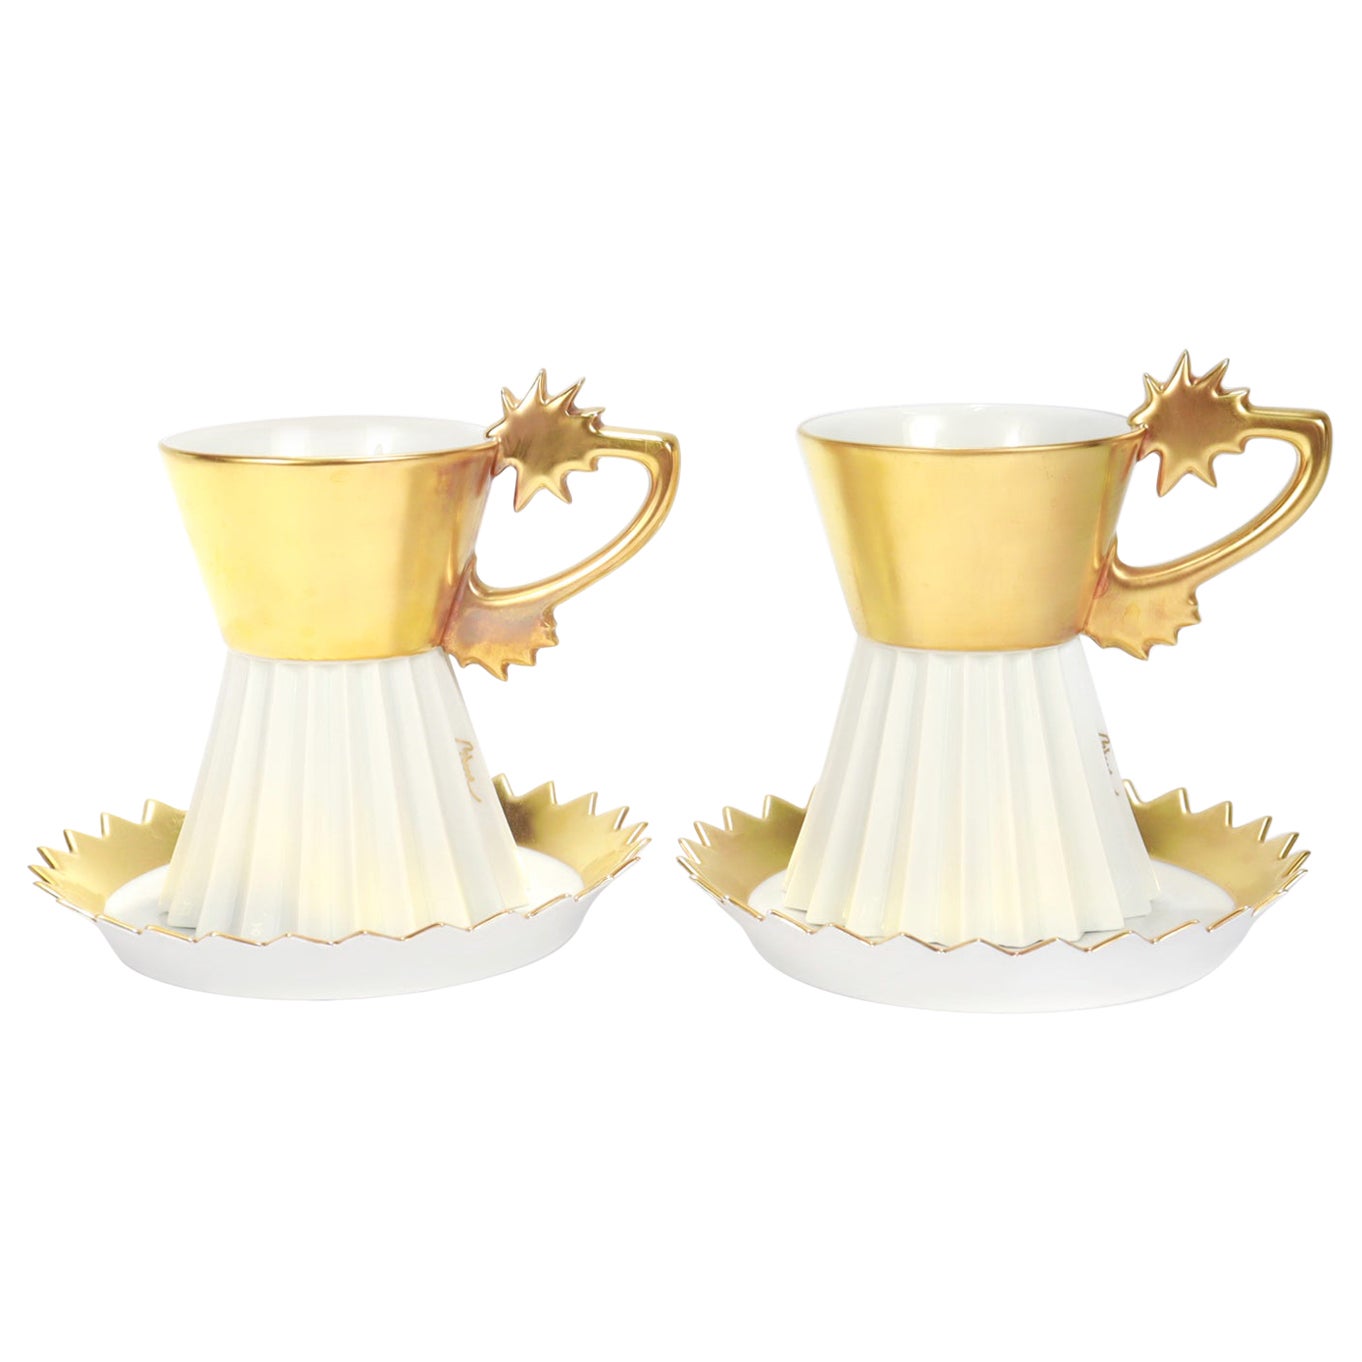 Pair of Rosenthal Studio Linie Gilt Porcelain No. 23 Cup & Saucers by Otto Piene